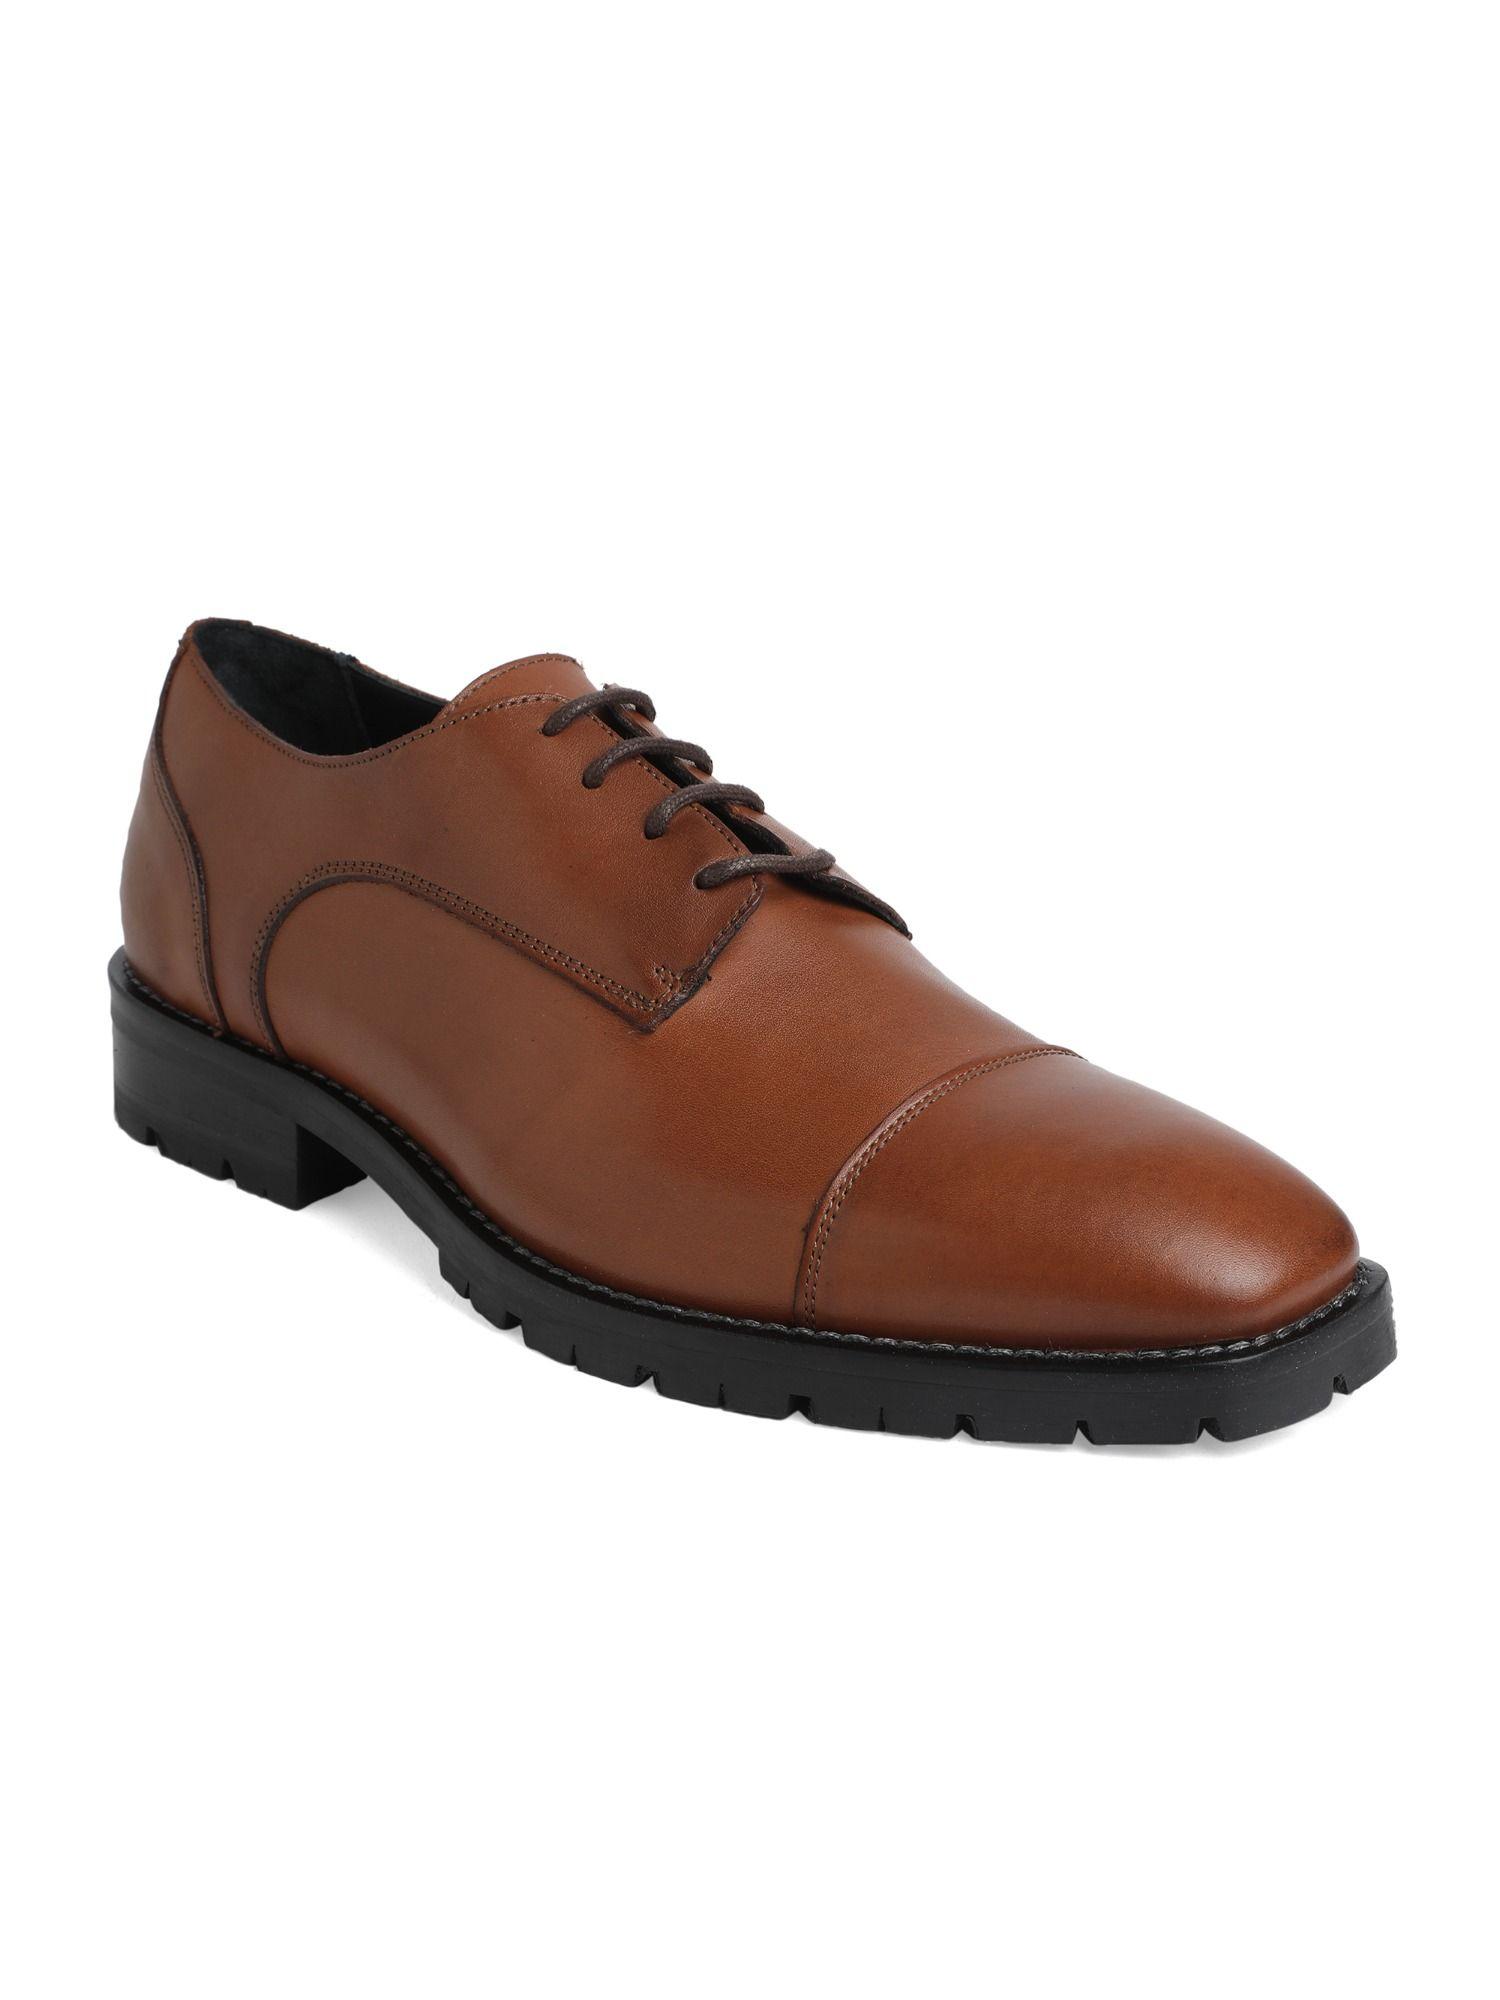 monte carlo leather tan solid formal shoes